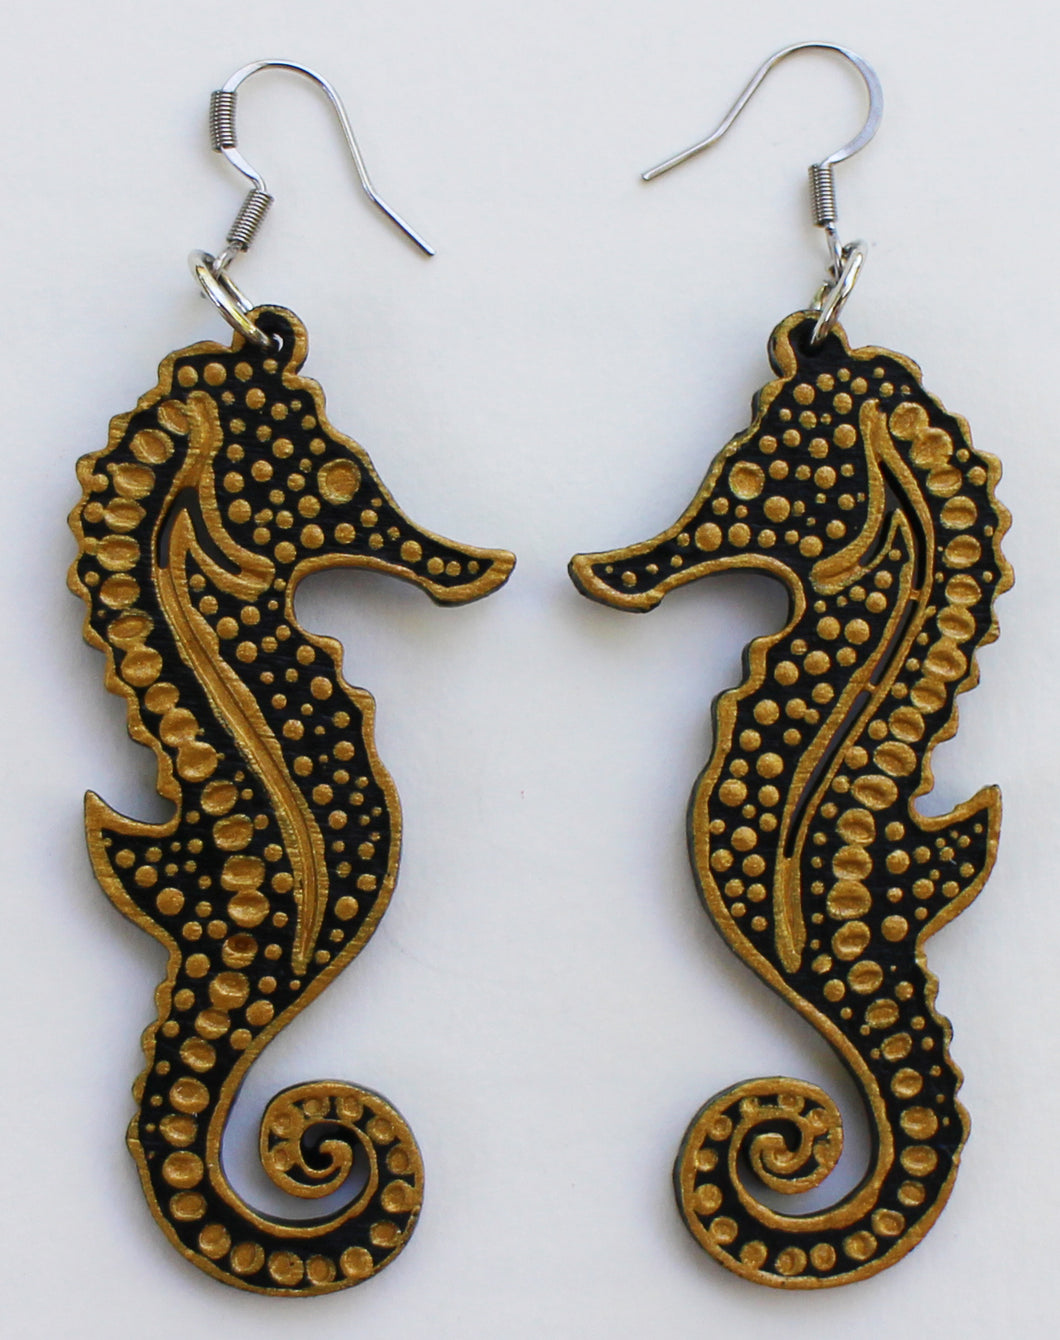 Black and Gold Hand Painted Sea Horse Earrings